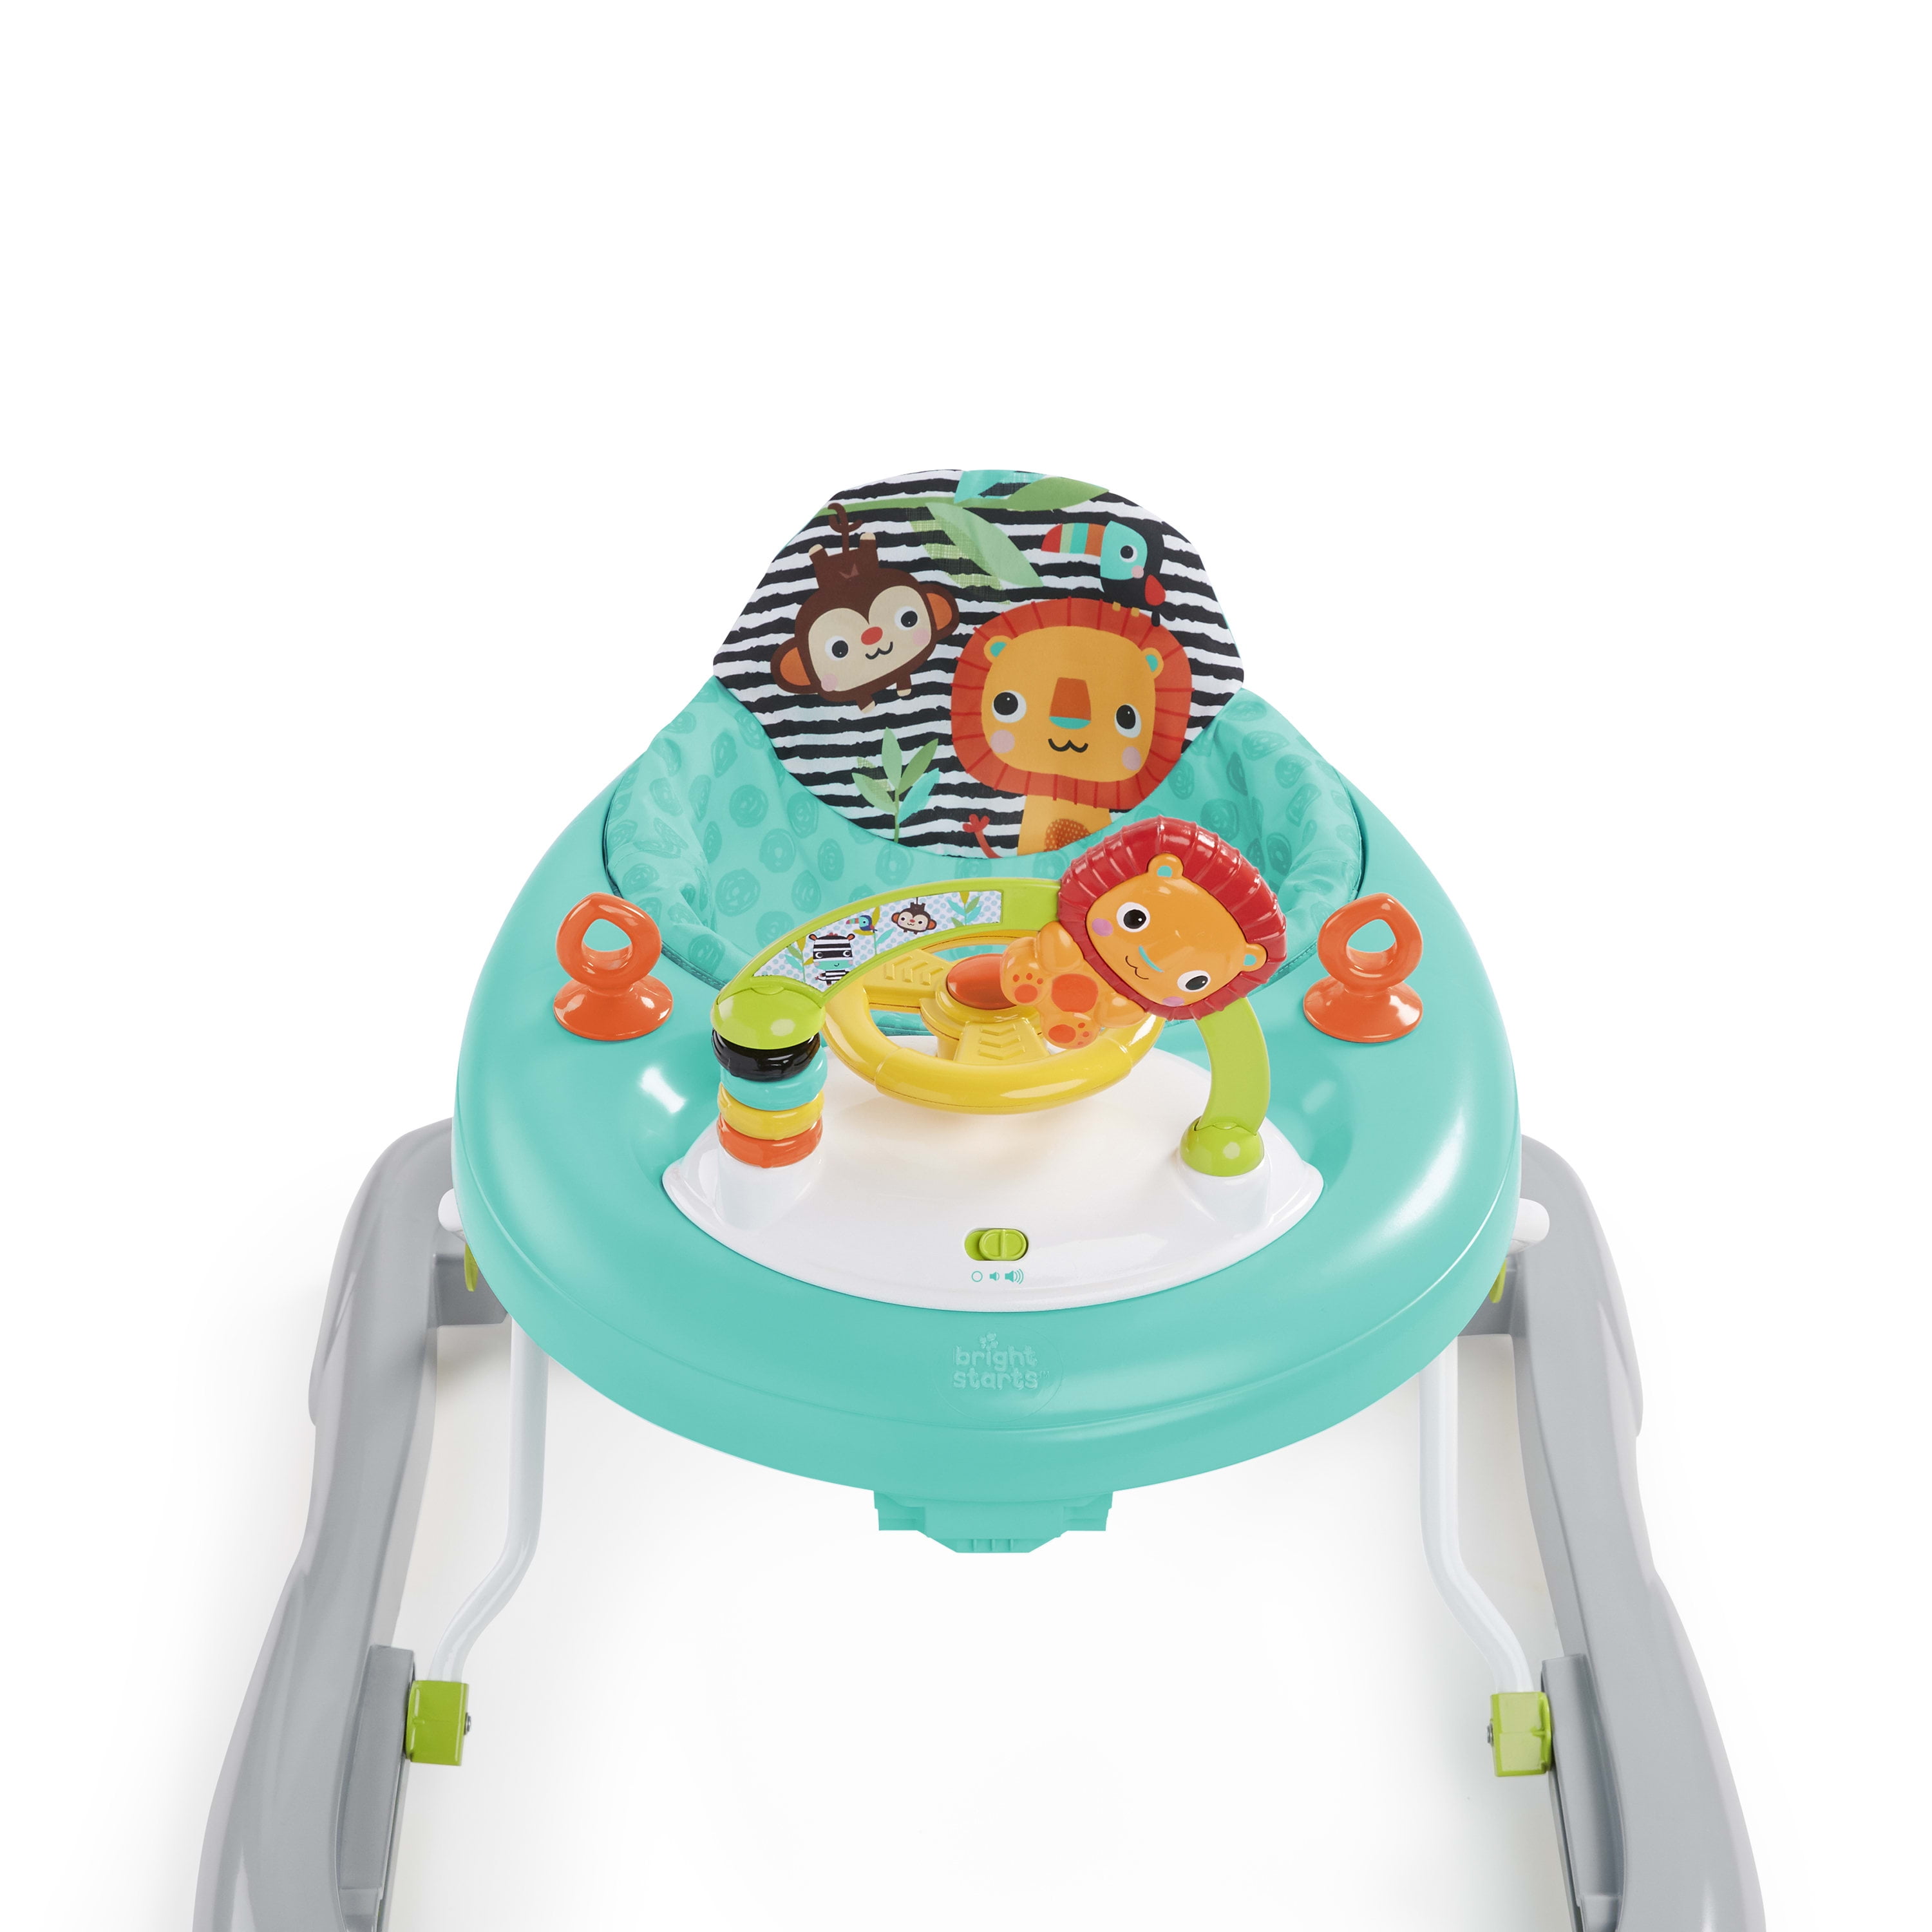  Bright Starts Giggling Safari Walker with Easy Fold Frame for  Storage, Ages 6 Months + : Baby